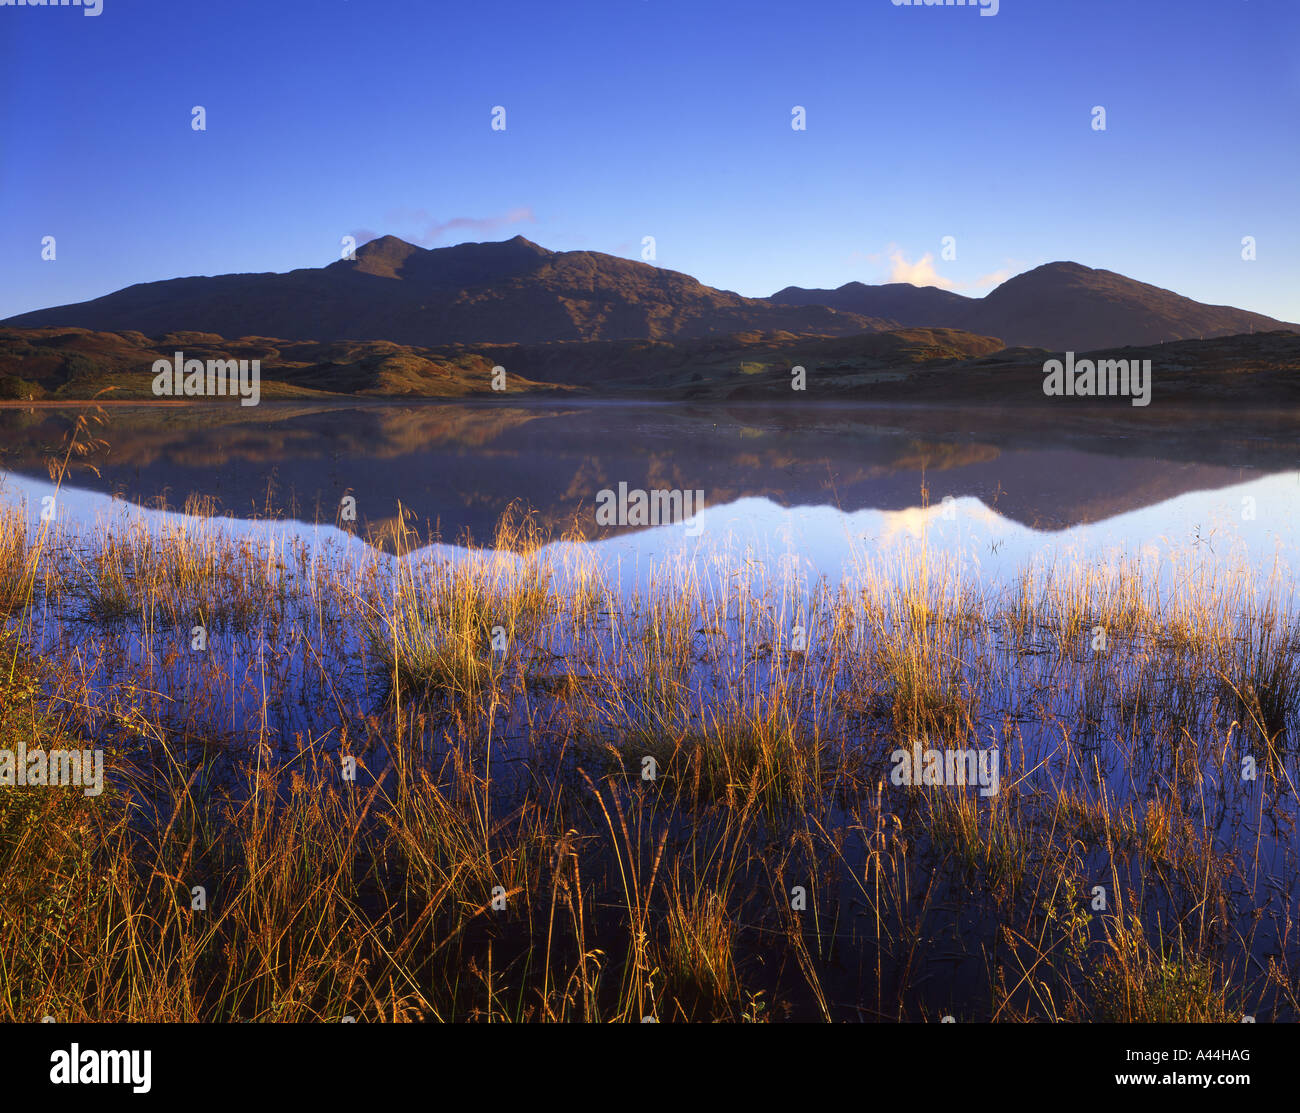 Ben Cruachan at dawn reflected in the still waters of Loch Tromlee near Kilchrenan, Argyll Stock Photo